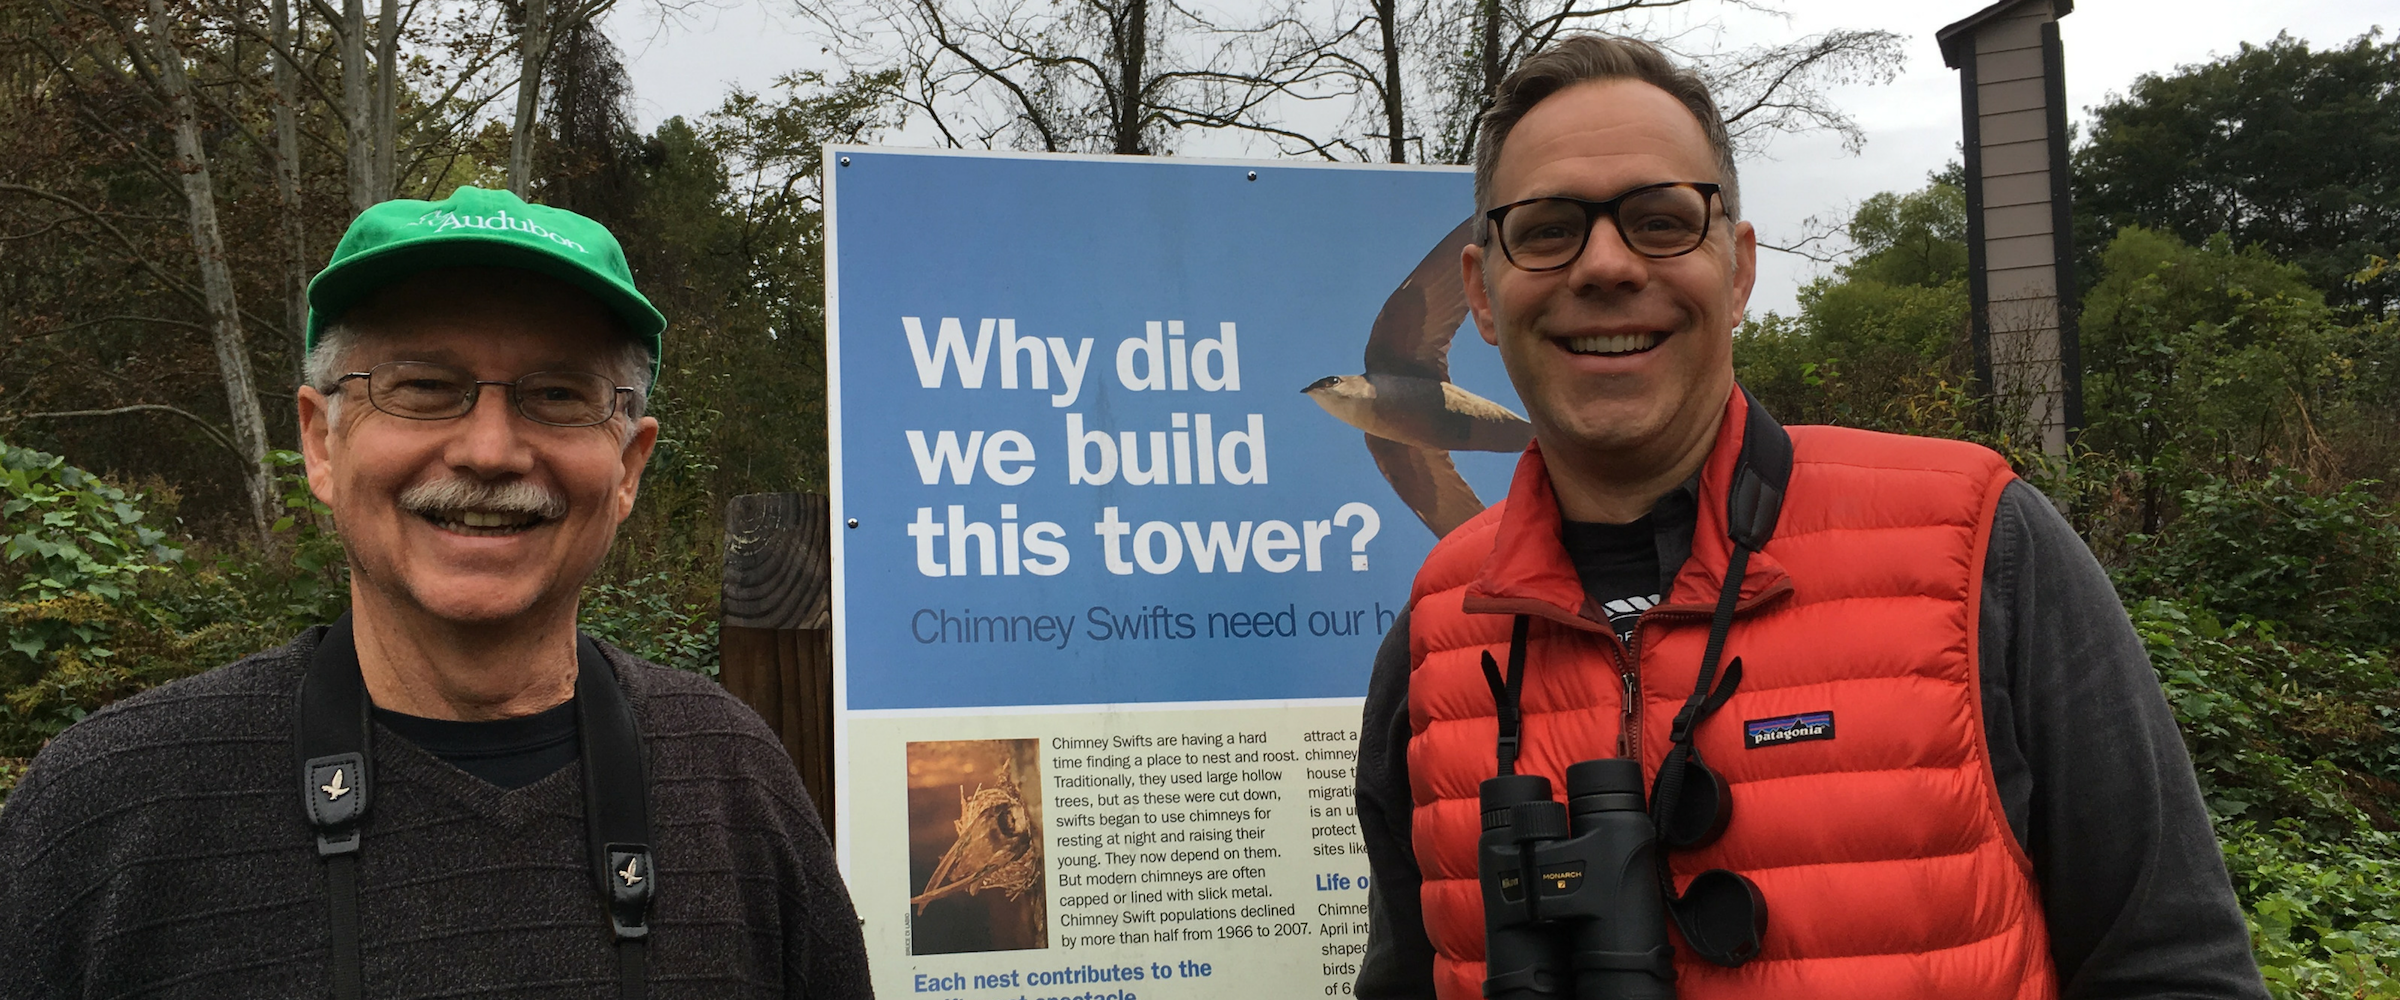 Tom Tribble and Andrew Hutson with a Chimney Swift Tower.